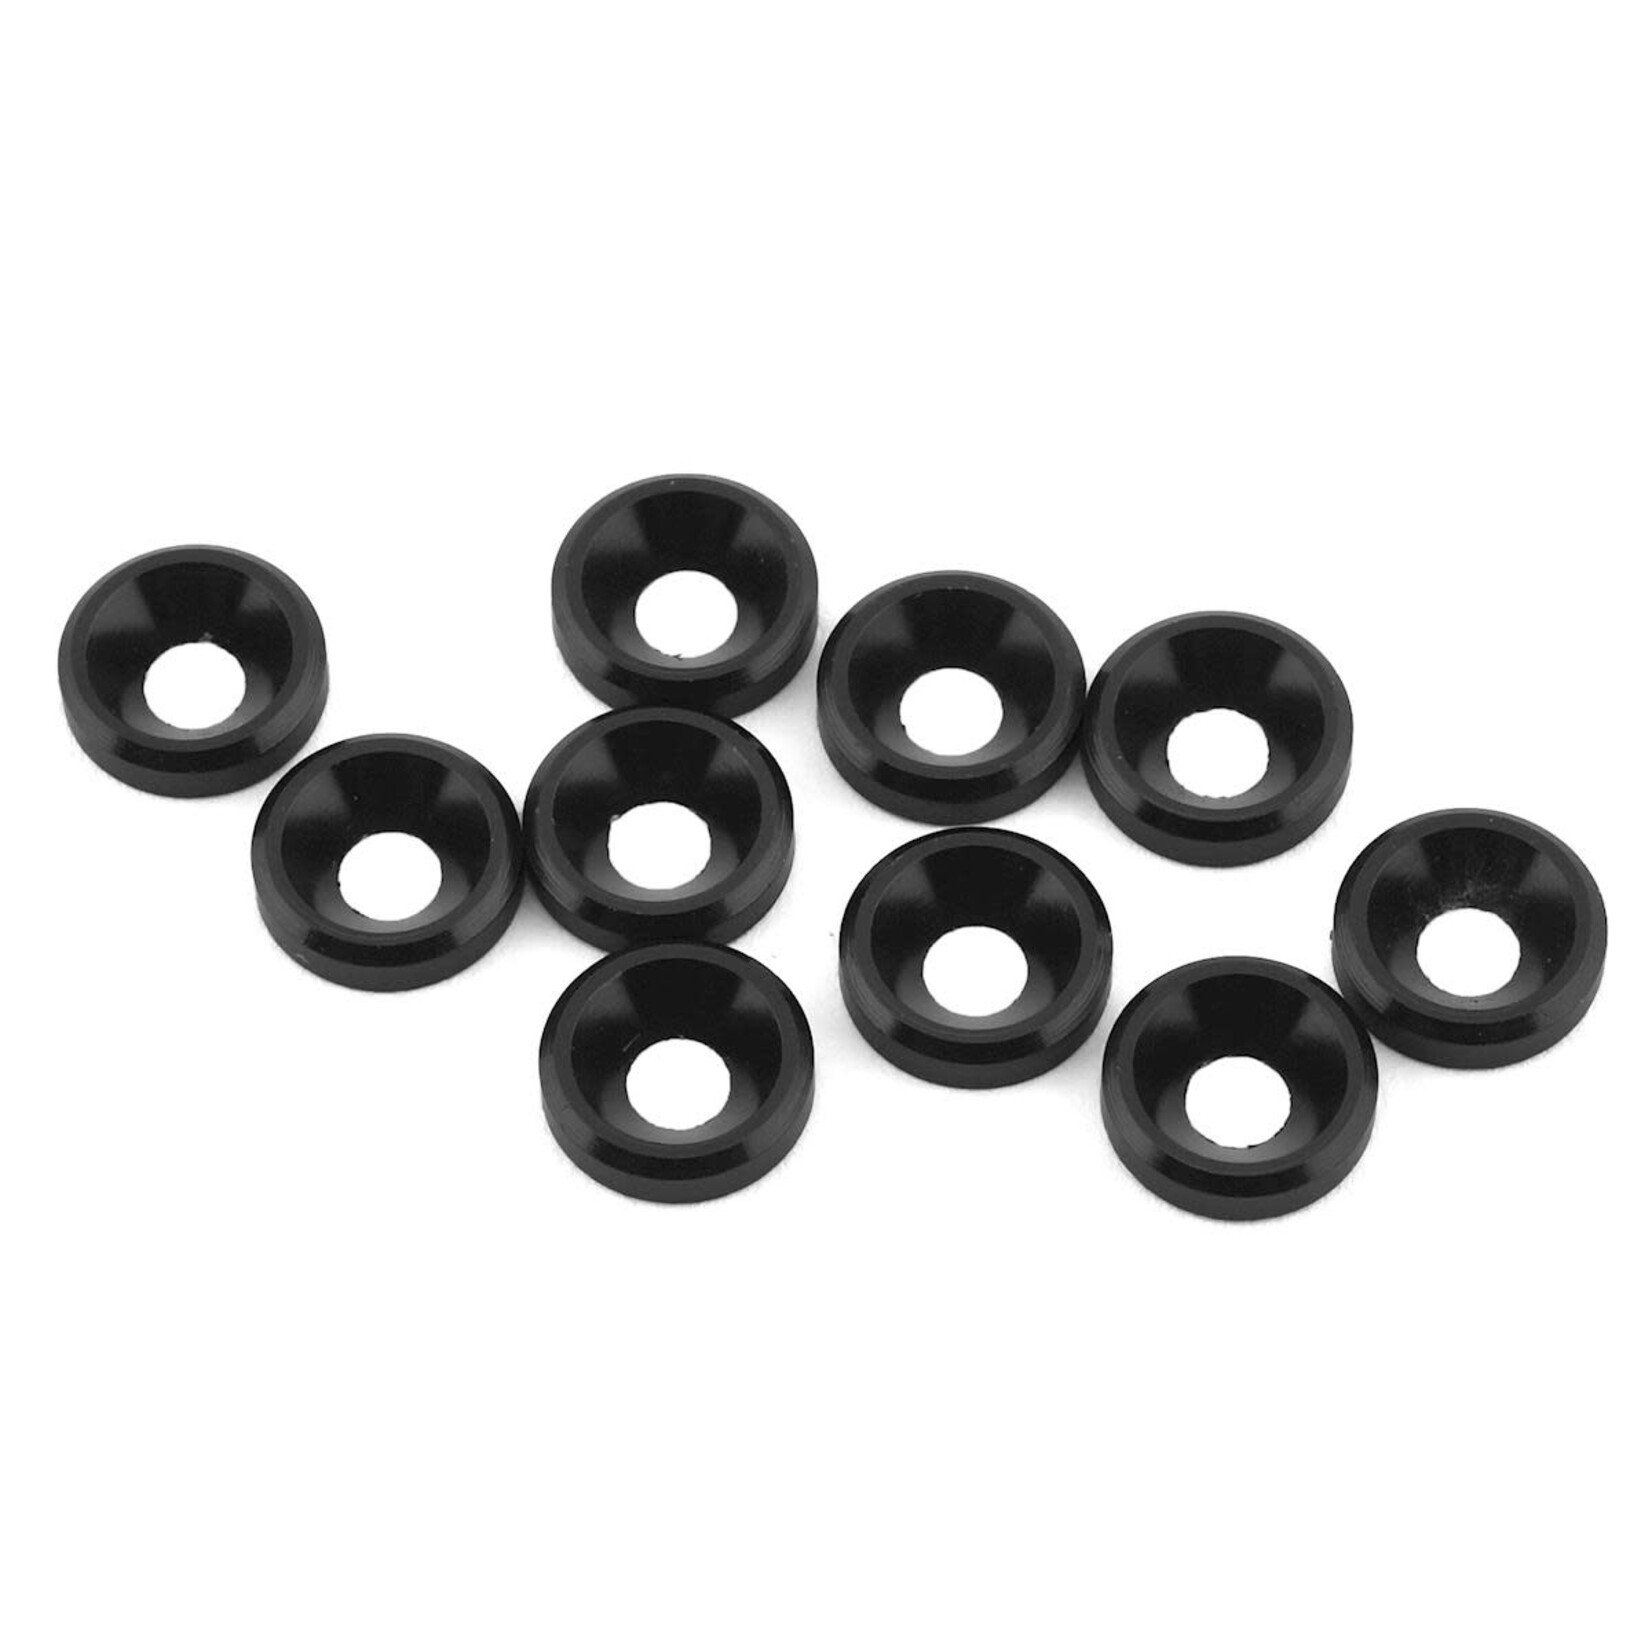 1UP Racing 1UP Racing 3mm Countersunk Washers (Black) (10) #80309